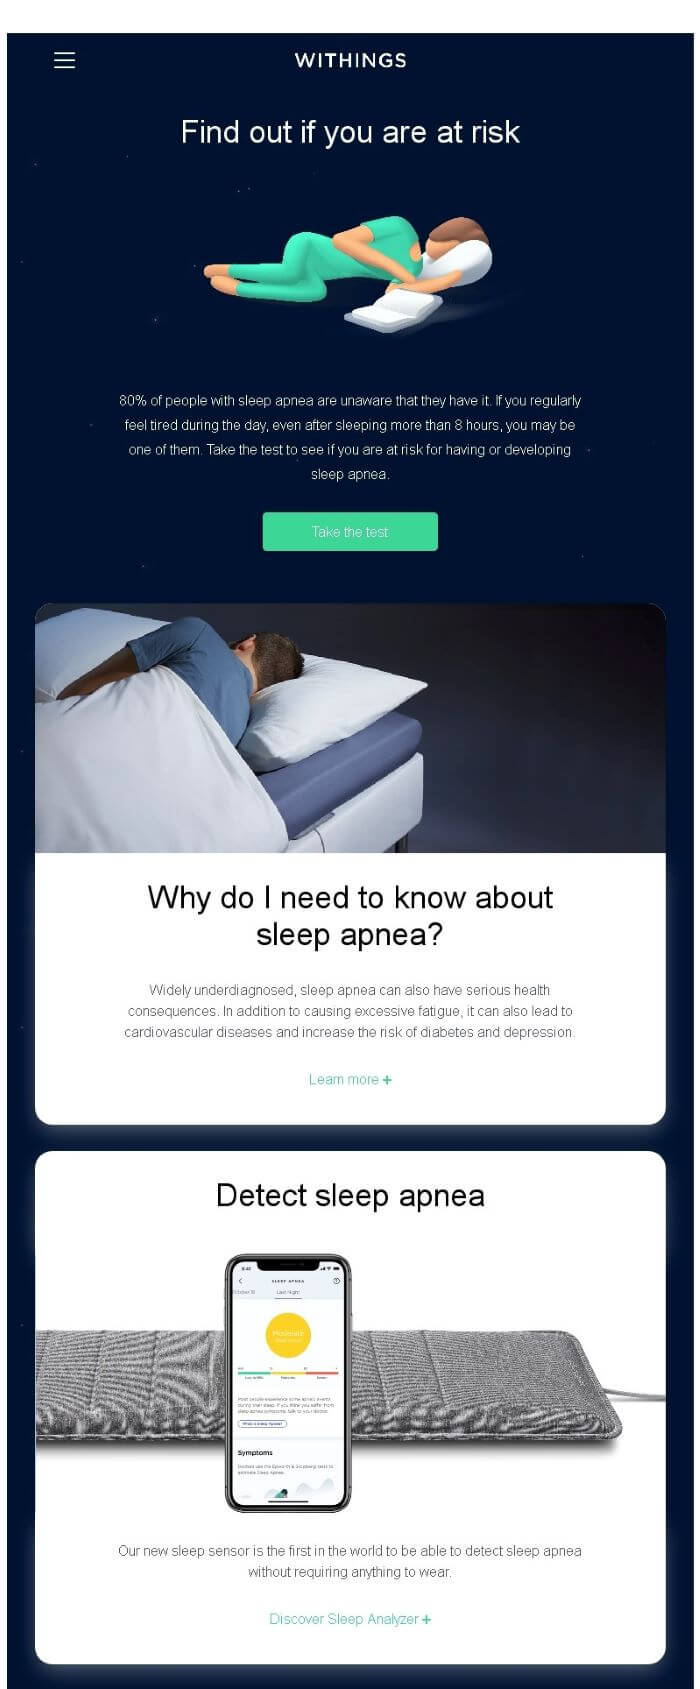 Withings sells health tech products. The main point of this email is to educate subscribers about risks associated with sleep apnea and only then showcase the new sleep sensor, which makes this email a newsletter